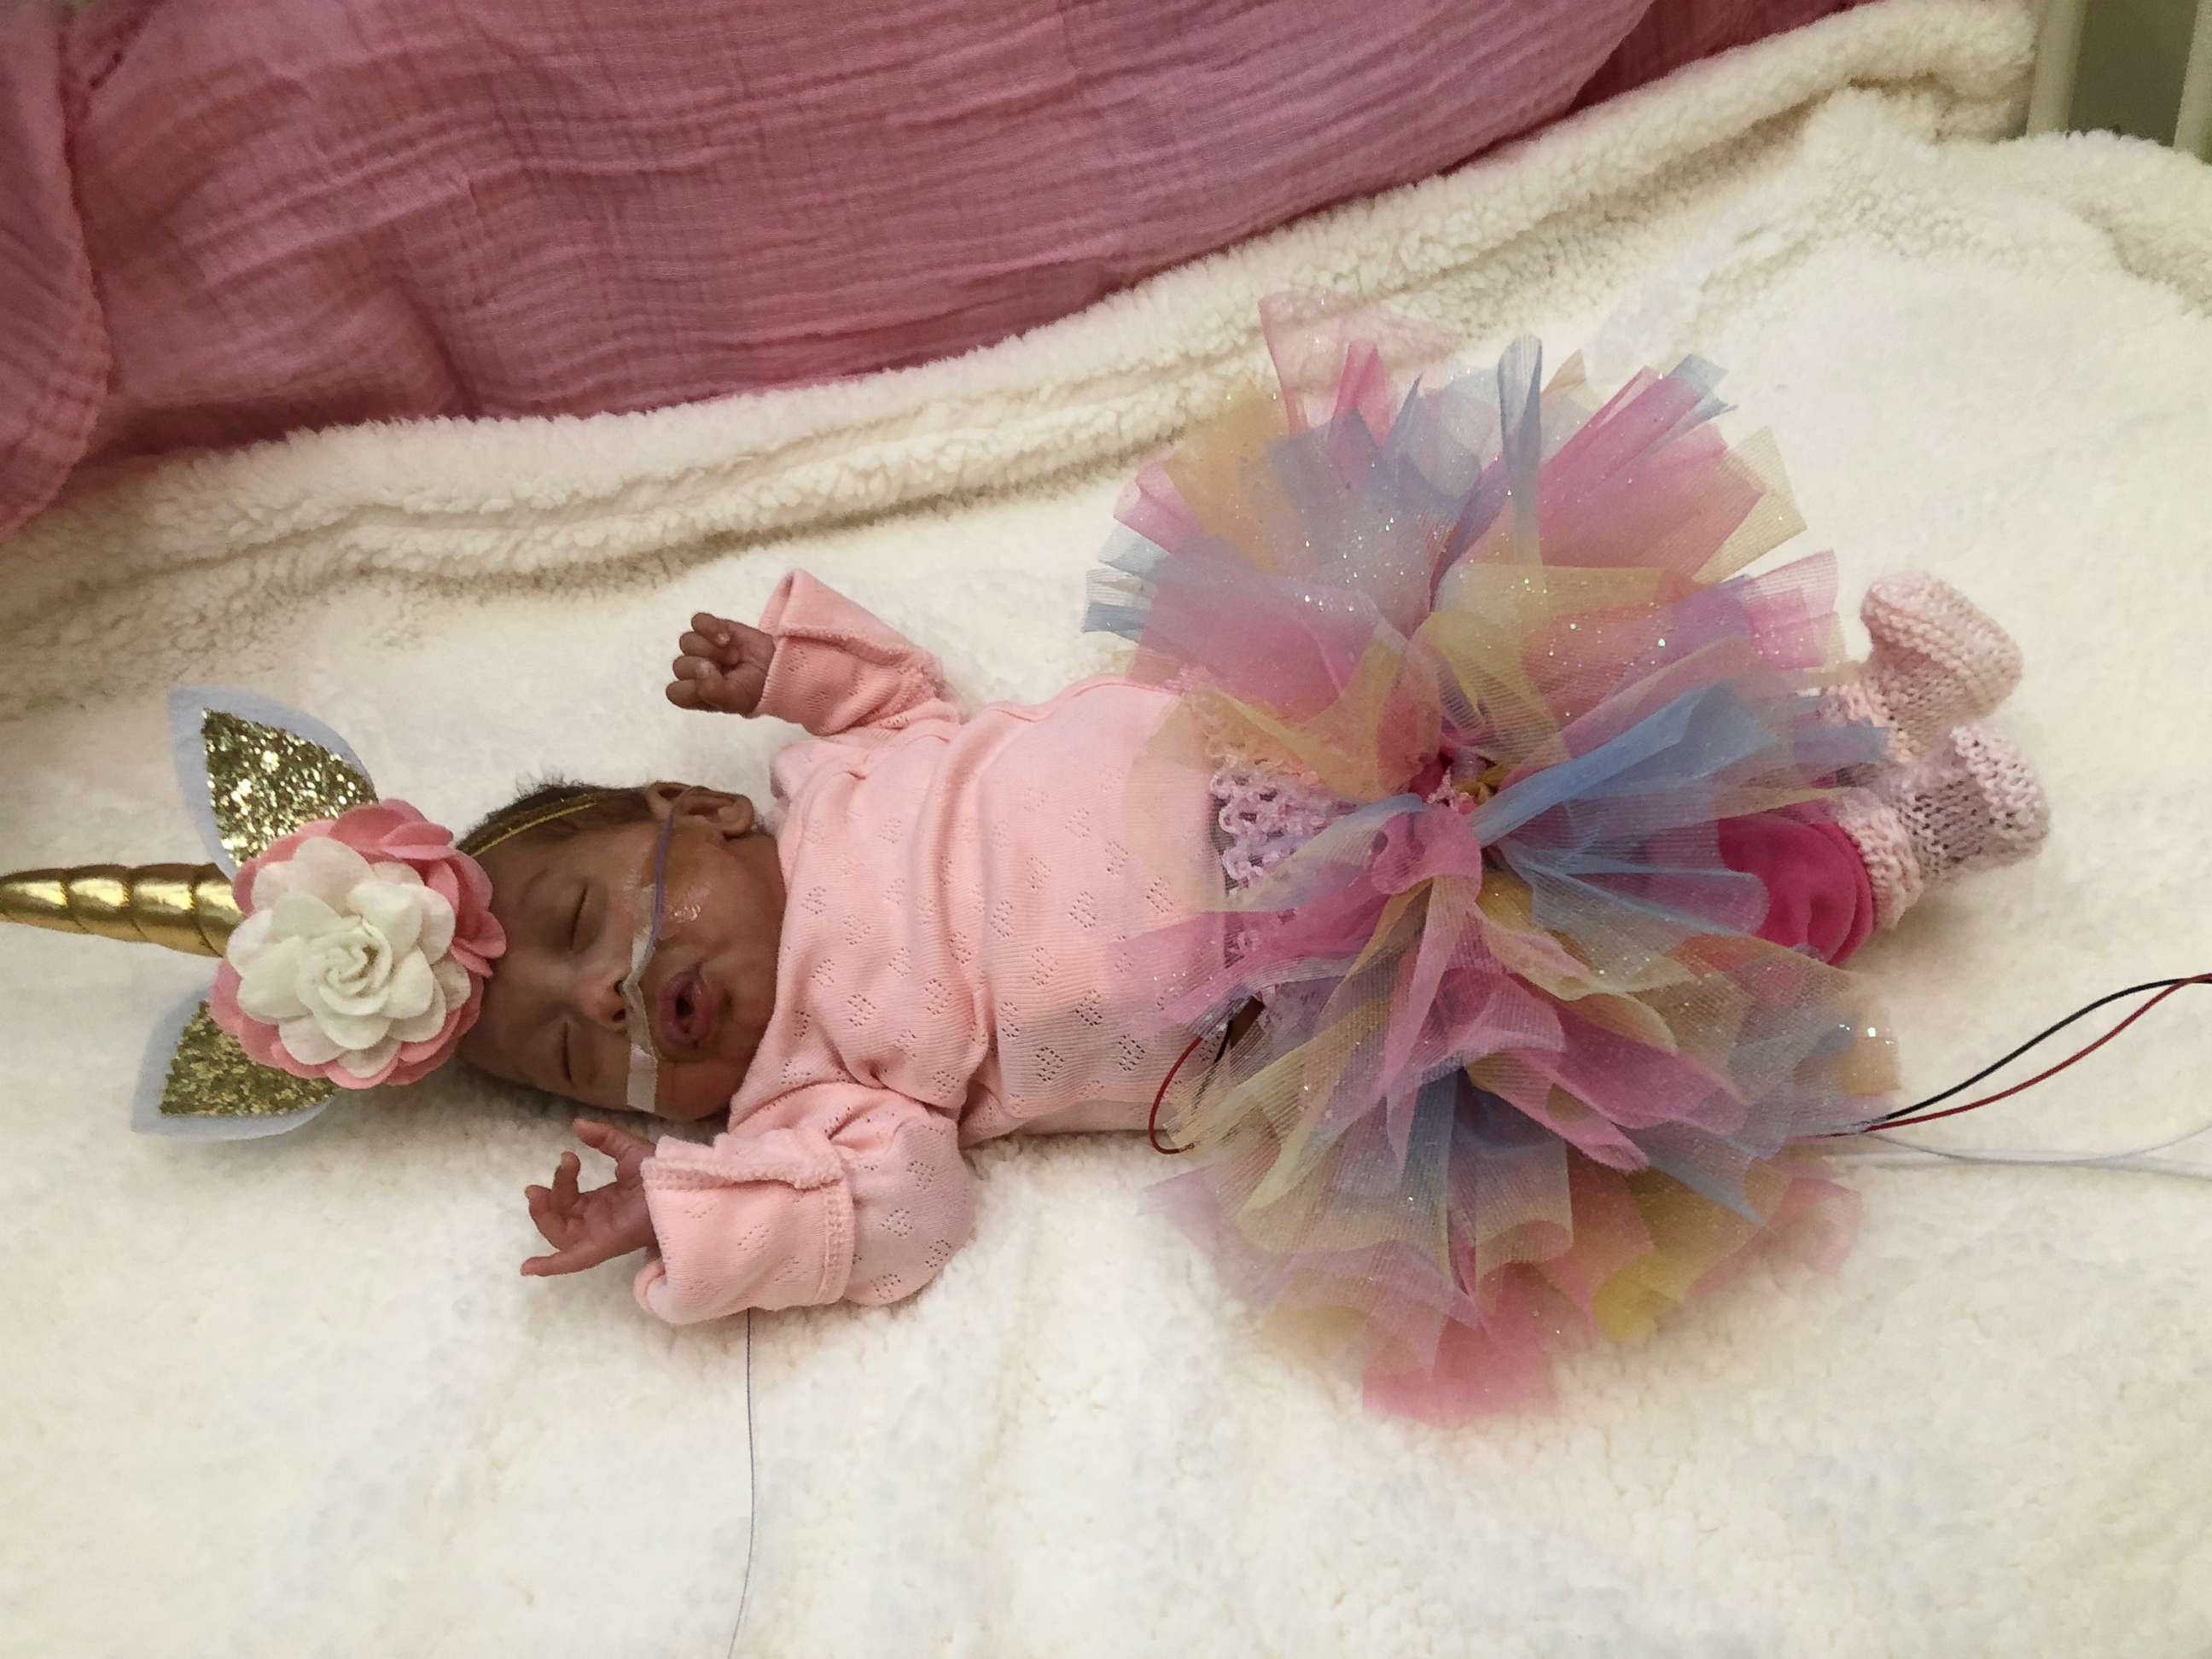 PHOTO: Baby Ella poses as a unicorn for Halloween in Advocate Children's Hospital's NICU in Illinois.